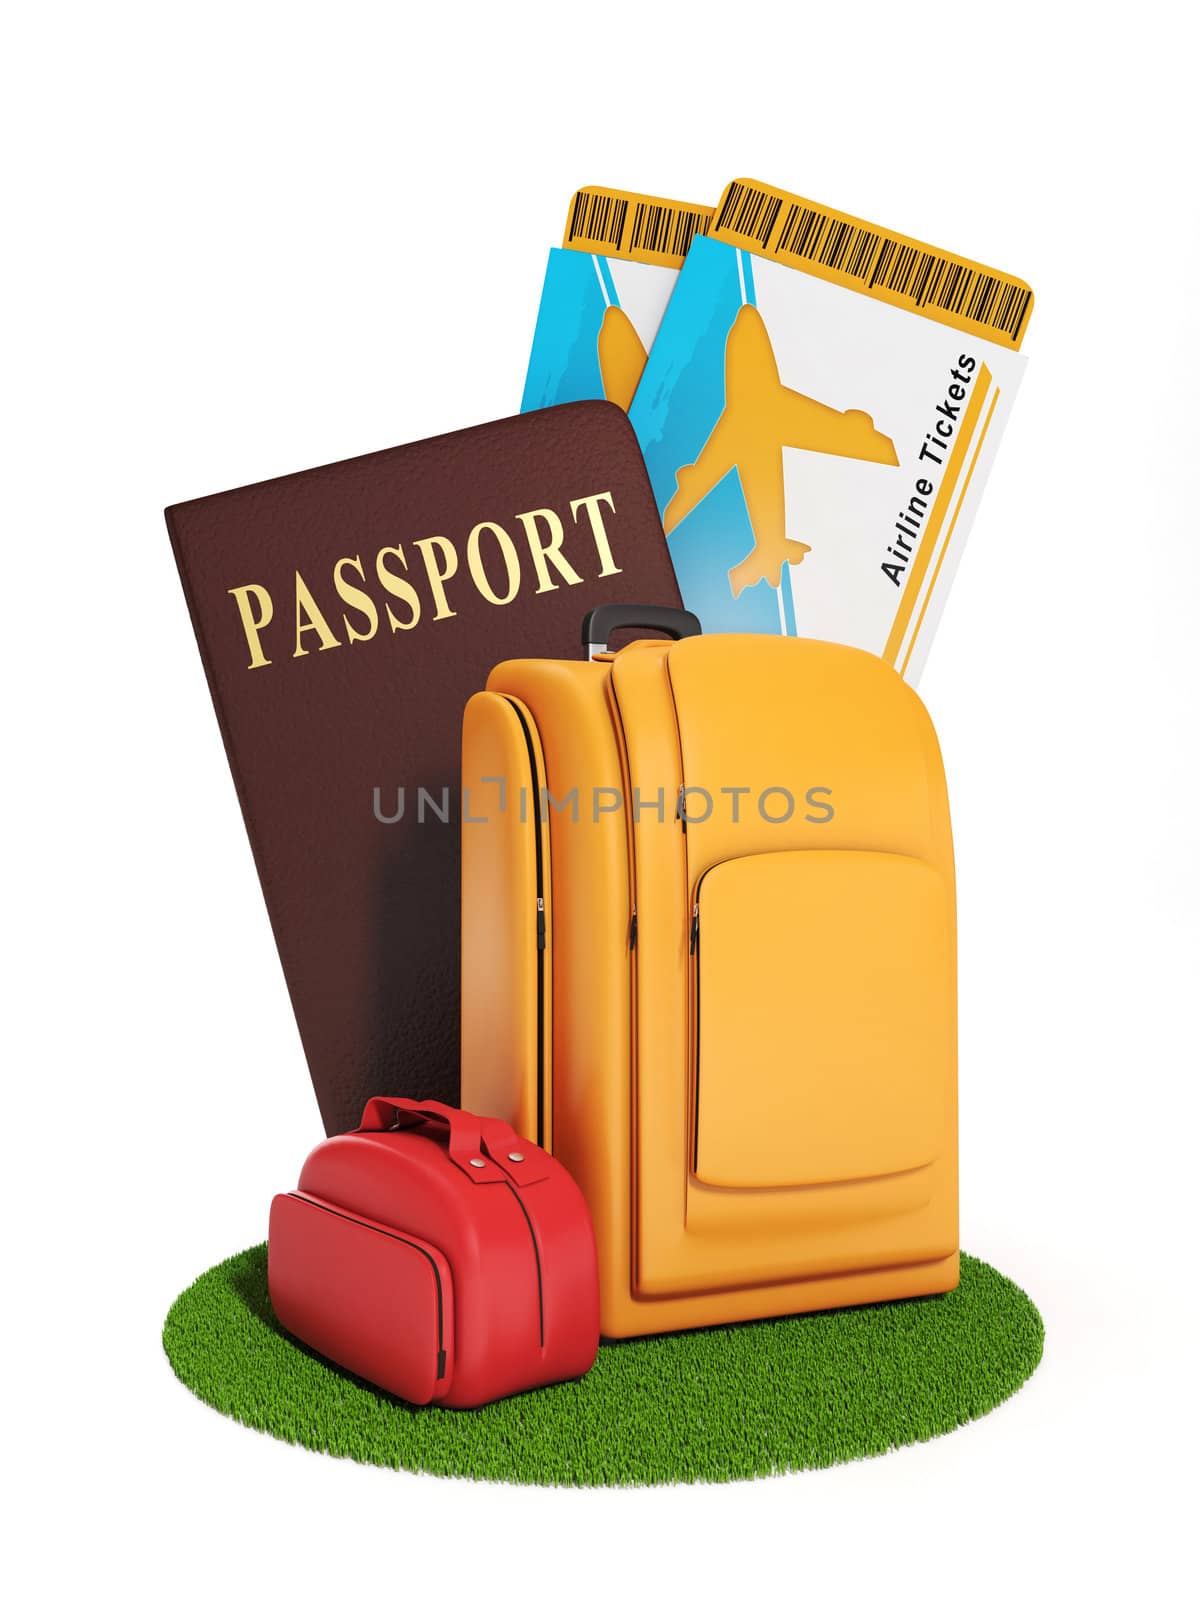 Sign trip. Illustration of a group of suitcases and a plane ticket, summer vacation and travel